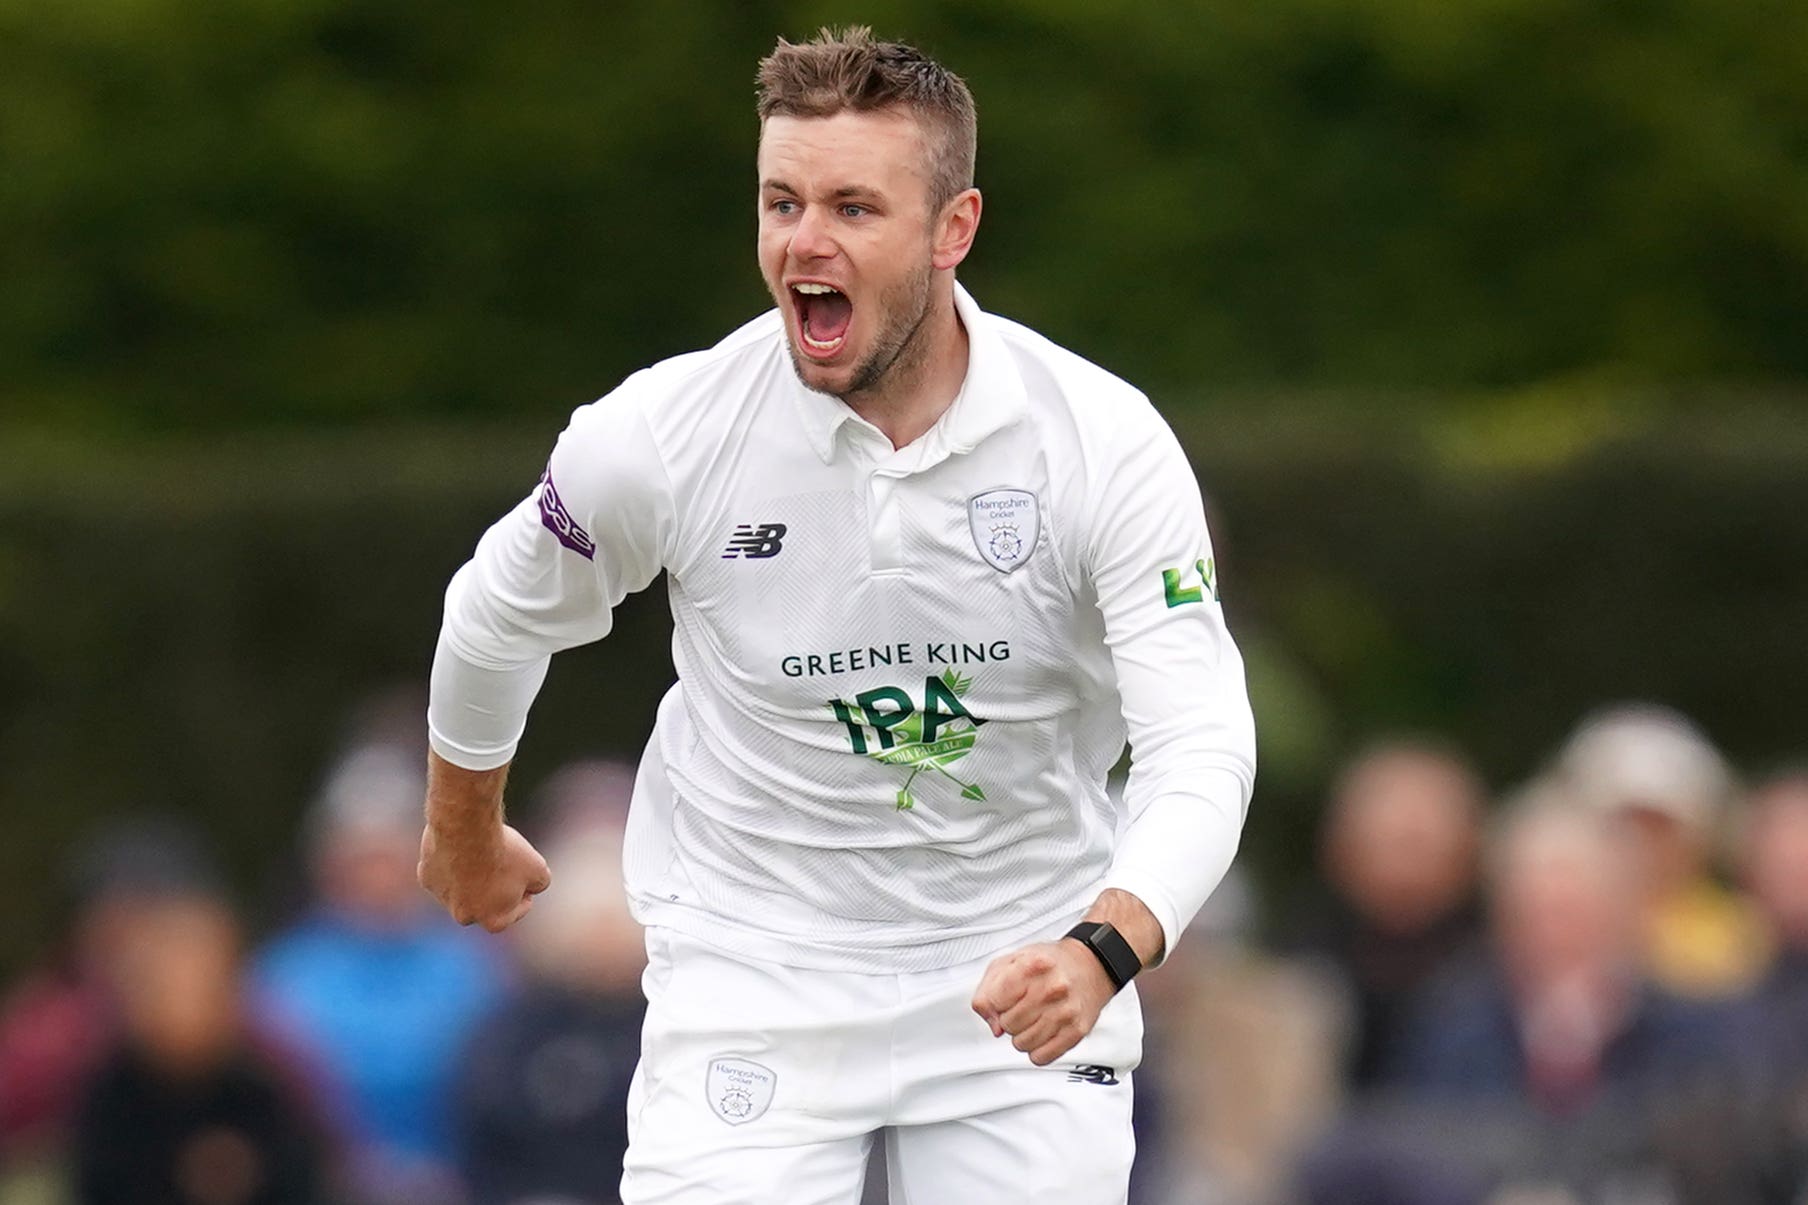 Hampshire’s Mason Crane celebrates the wicket of Lancashire’s Josh Bohannon during day three of the LV= Insurance County Championship division one match at Aigburth Cricket Ground, Liverpool. Picture date: Thursday September 23, 2021.